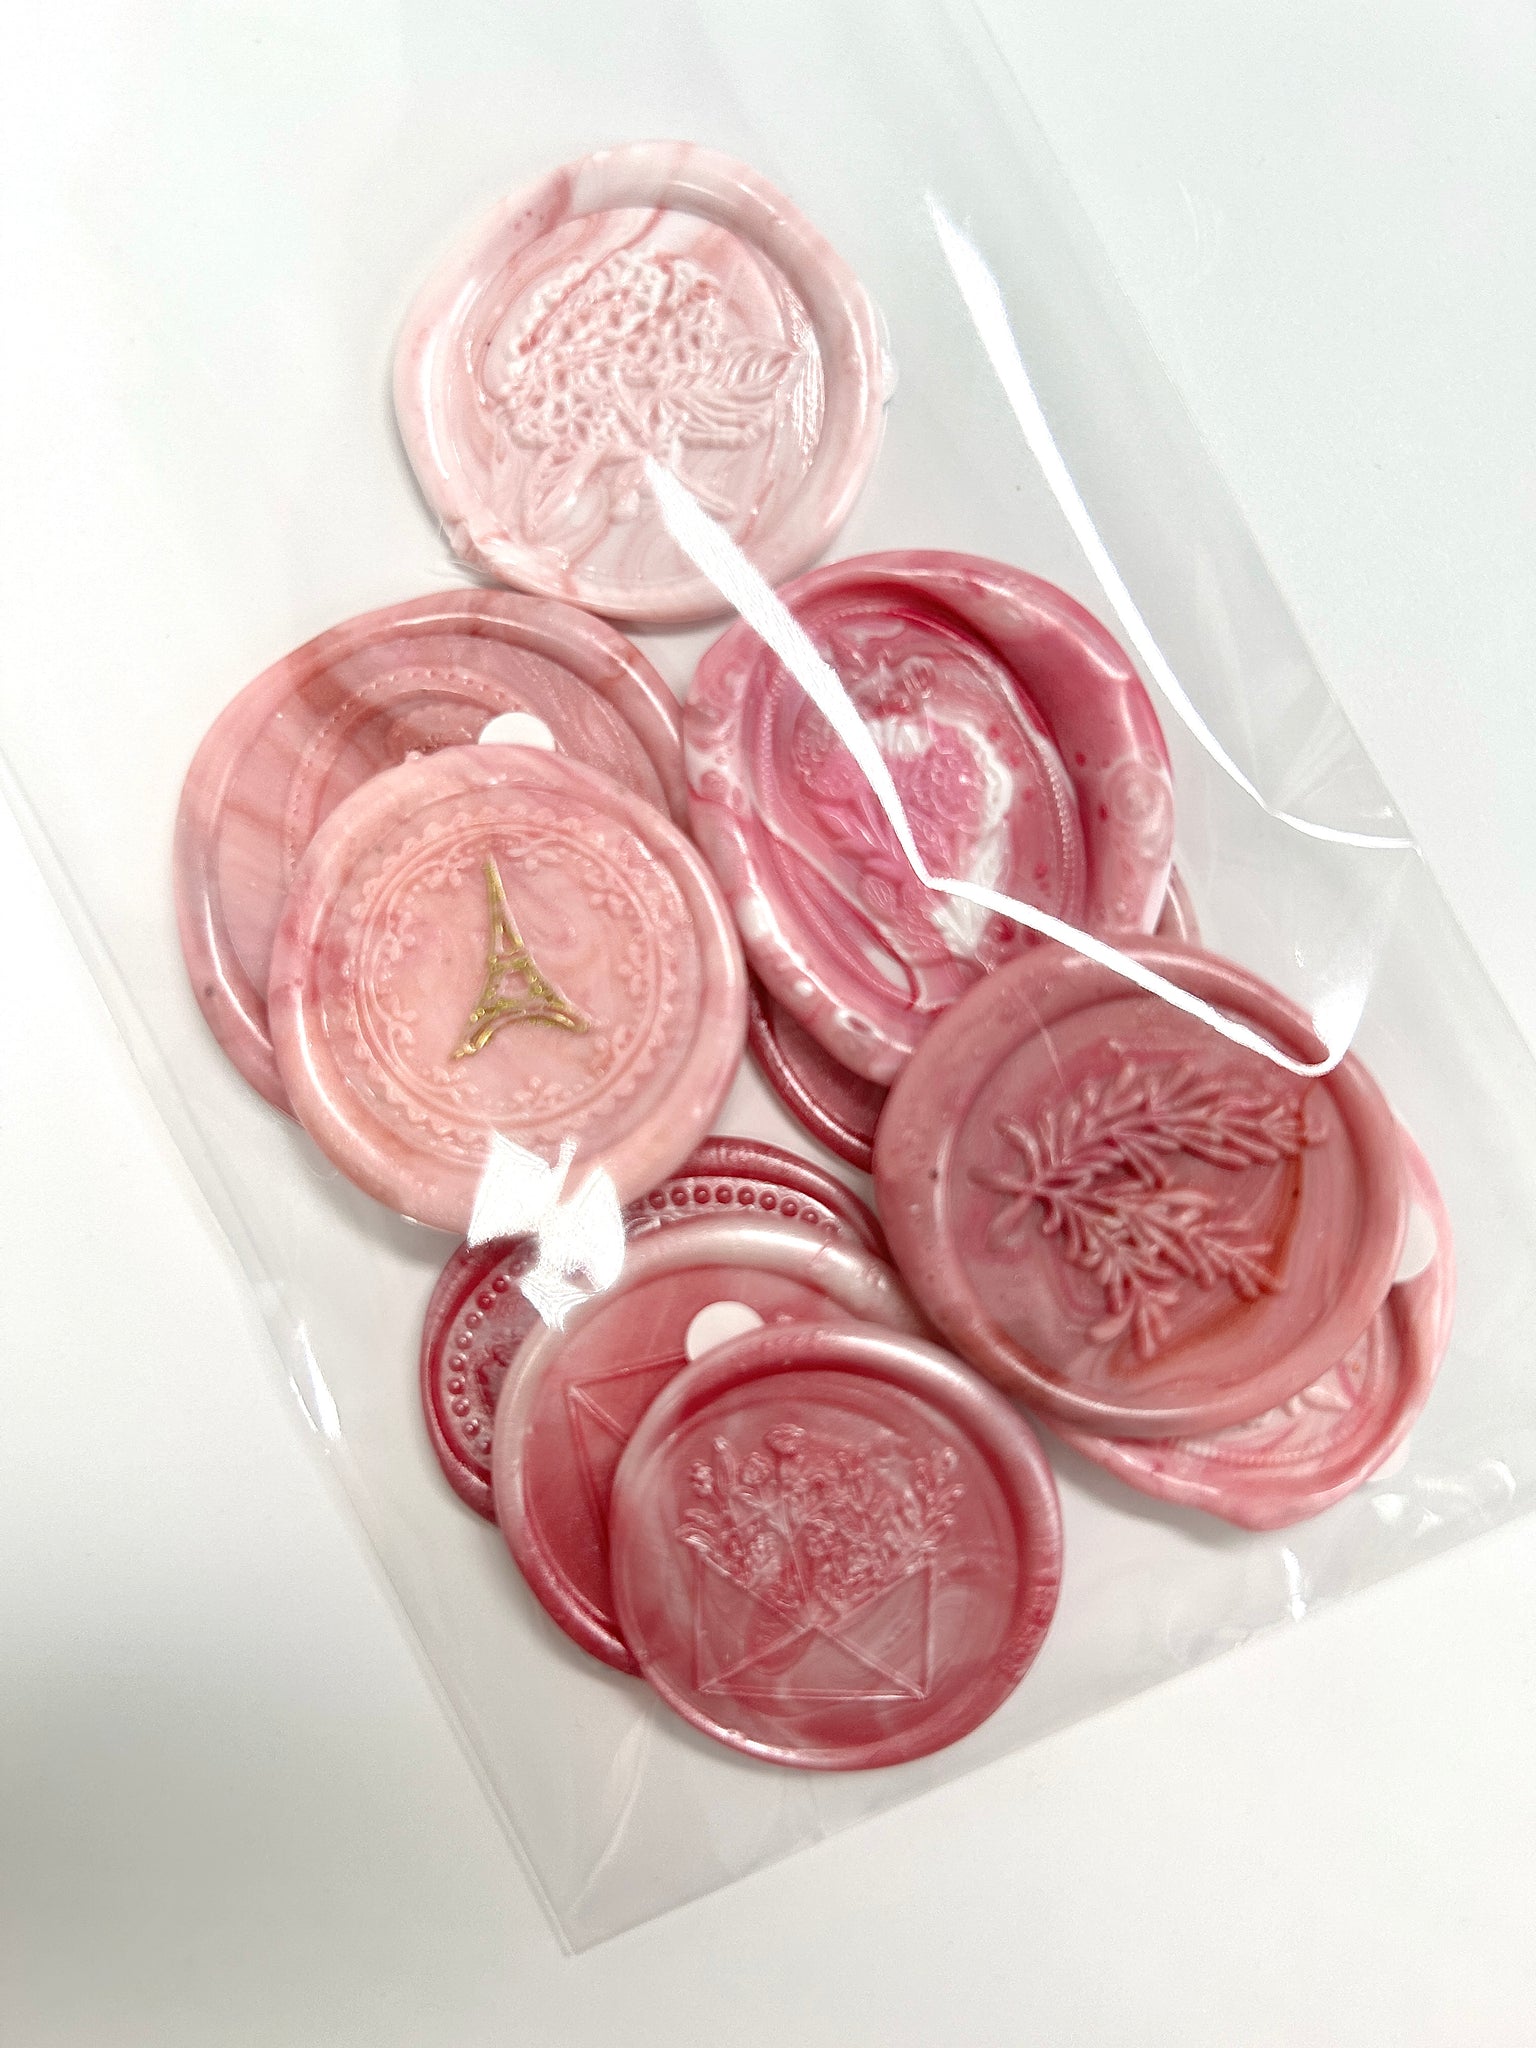 Hand Poured Raspberry Sorbet Assortment of Floral and Cameo Wax Seals Set of 10